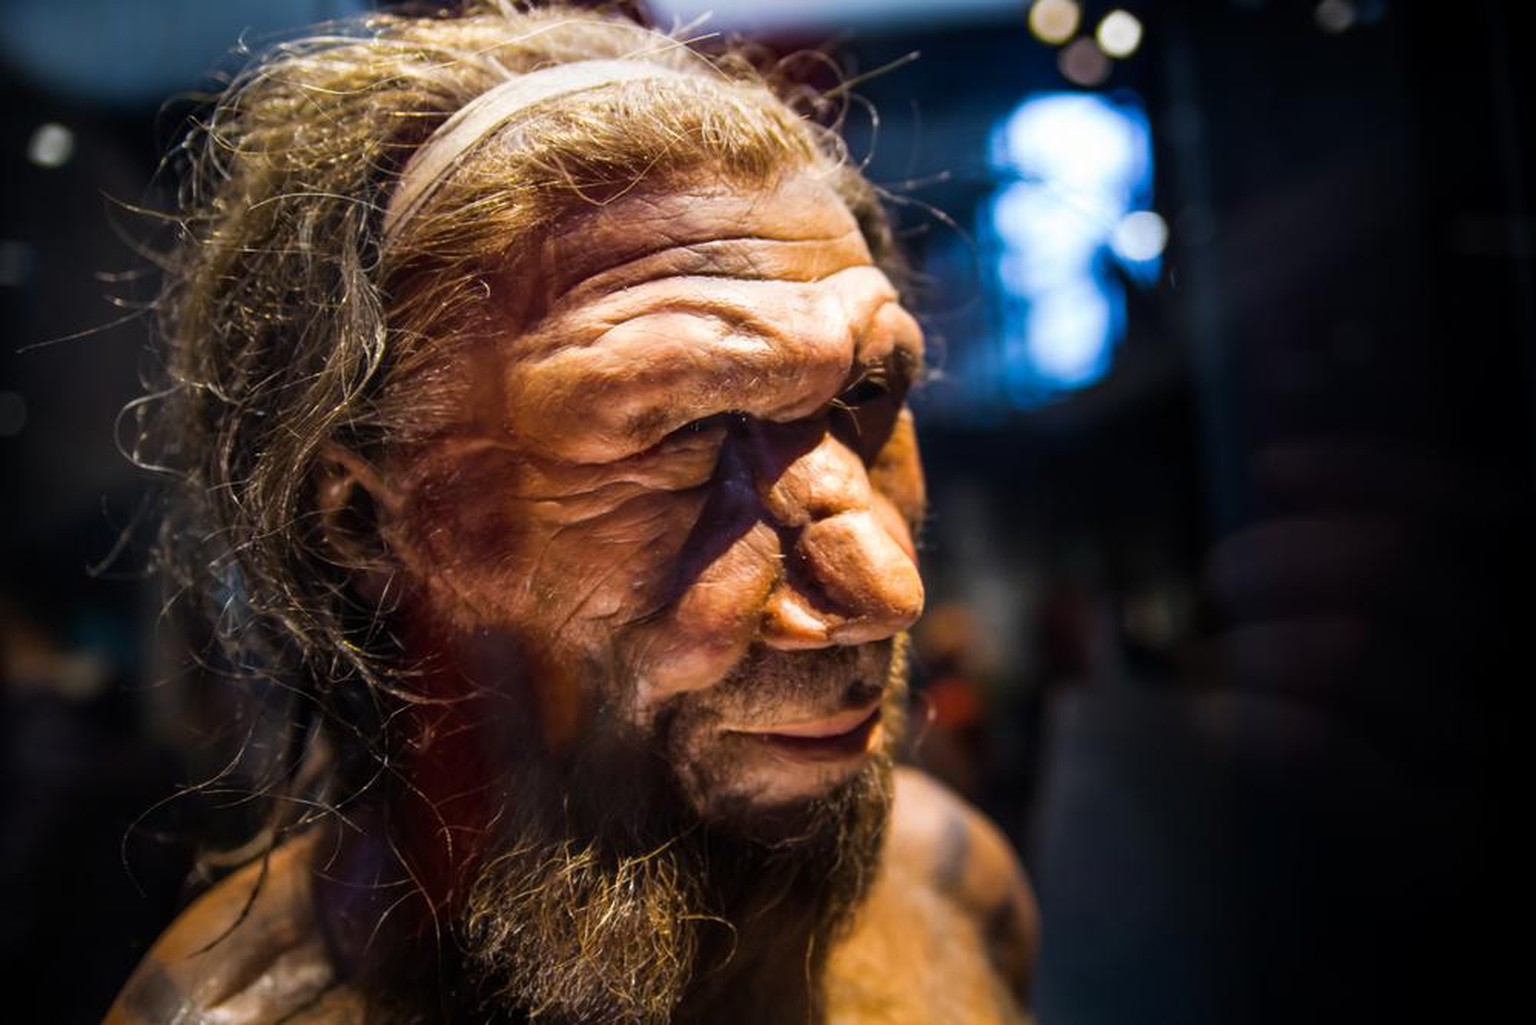 Neandertaler-Mann, London, UK - March 11, 2018: Neanderthal Homo adult male, based on 40000 year-old remains found at Spy in Belgium. National history museum.